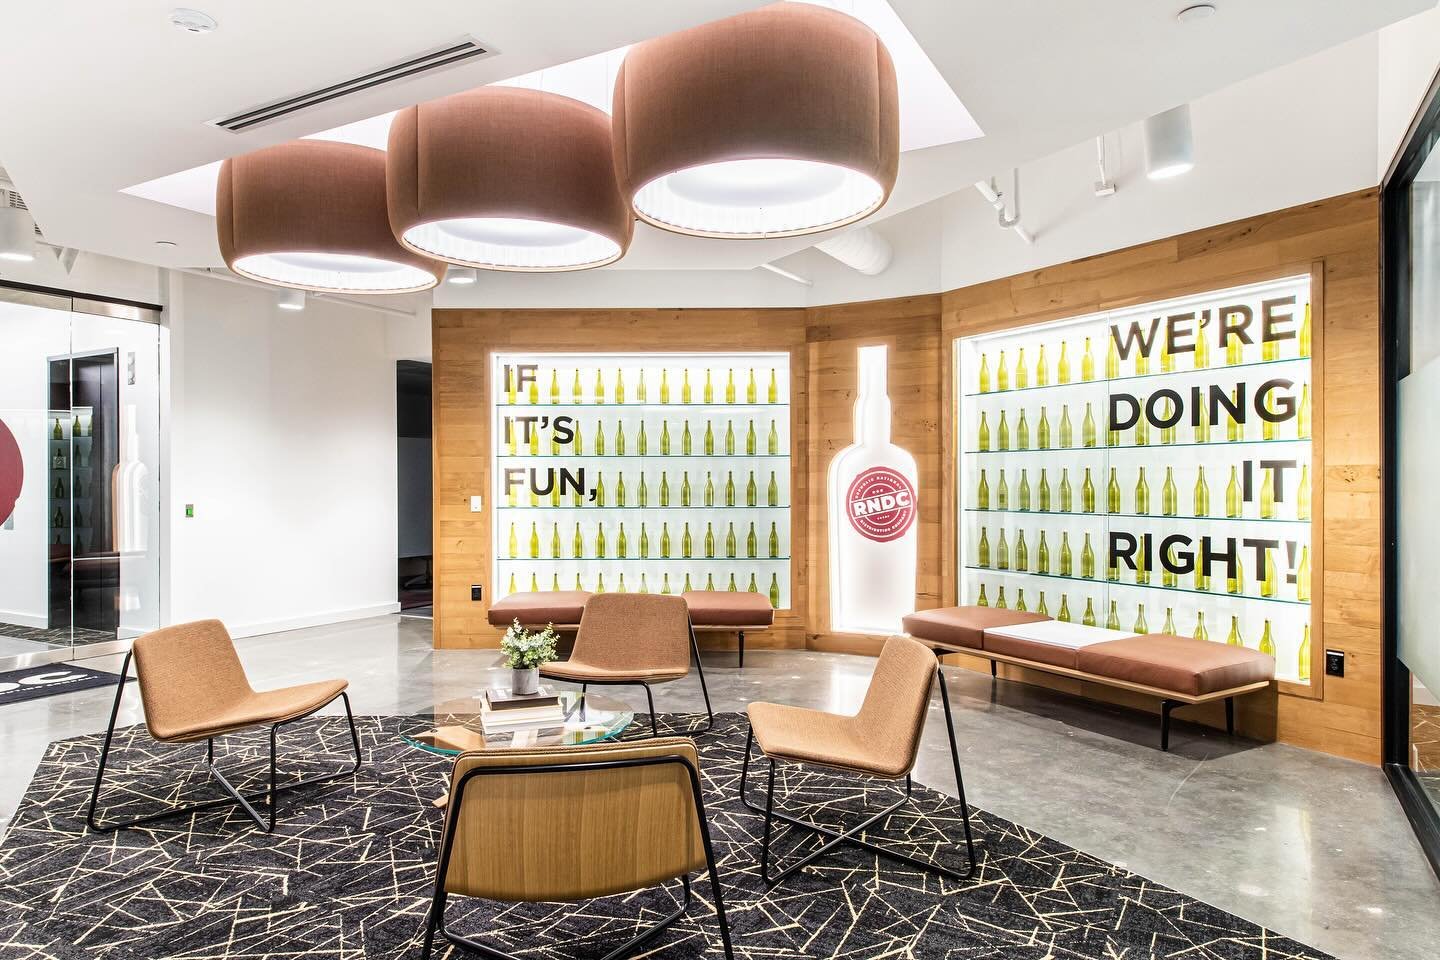 Congratulations to @murphymeyersdesign Republic National Distributing Company for Best on a Budget!
 
RNDC&rsquo;s new office consolidated several locations into one centralized space that&rsquo;s attractive for new talent and budding executives. Des